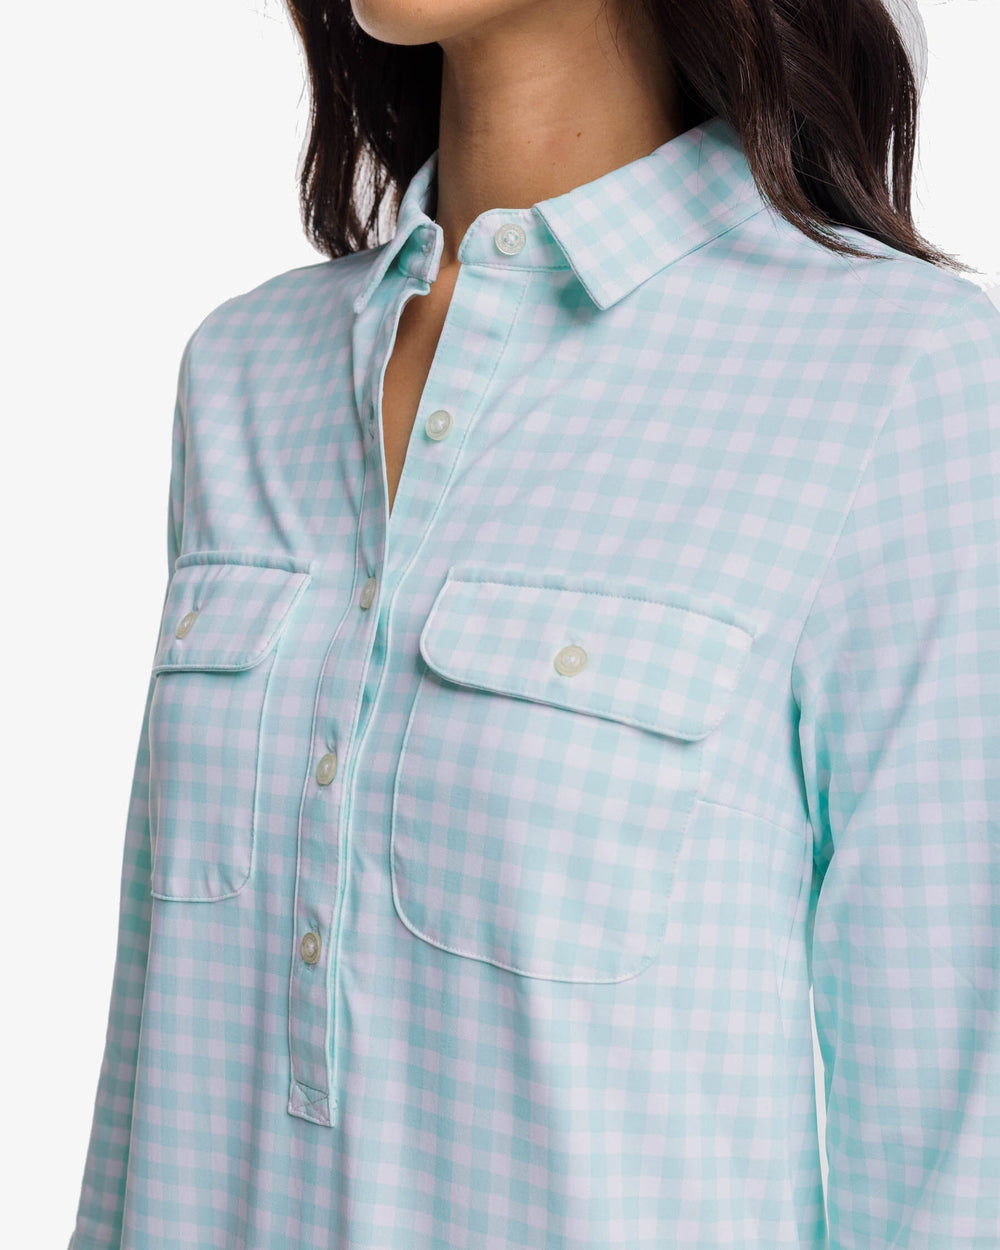 The detail view of the Southern Tide Jessica Gingham Performance Dress by Southern Tide - Baltic Teal